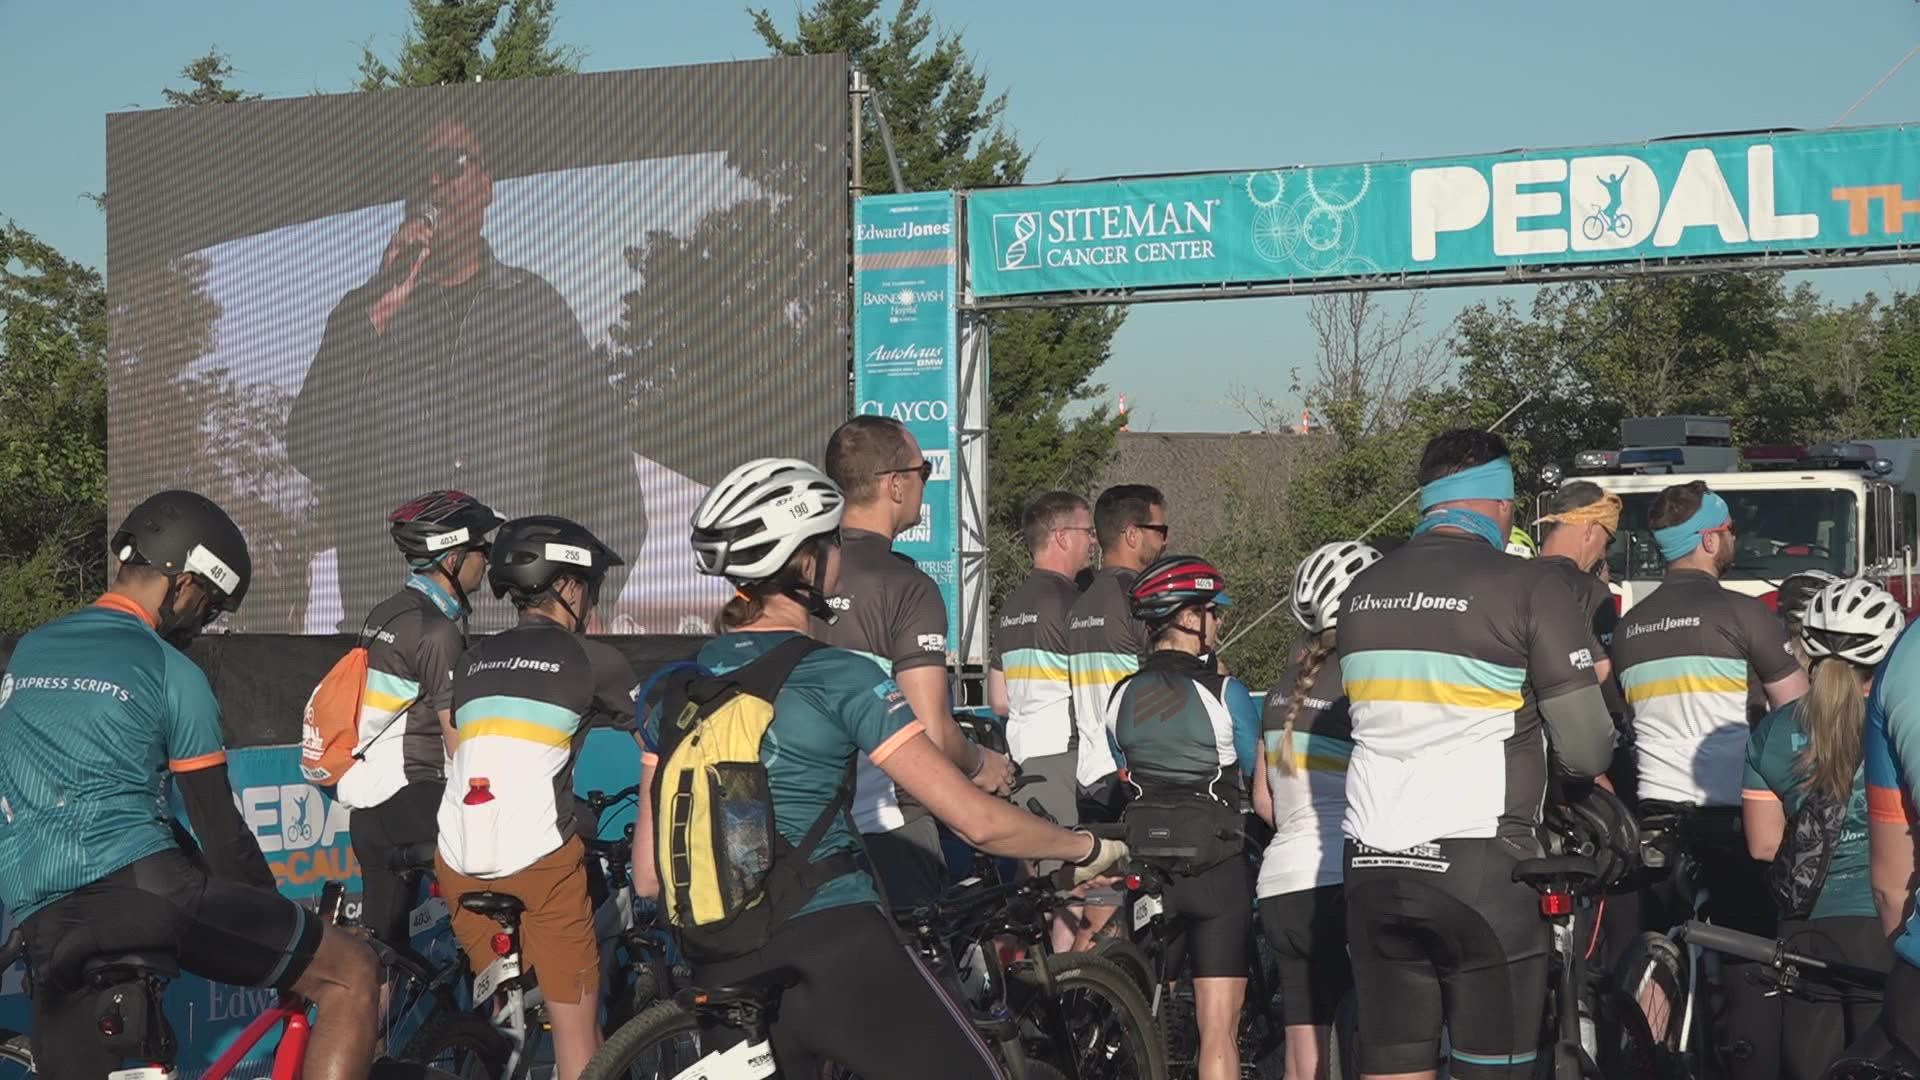 Pedal the Cause returns for its 13th year in the St. Louis area. They have raised more than $3 million and counting for cancer research.